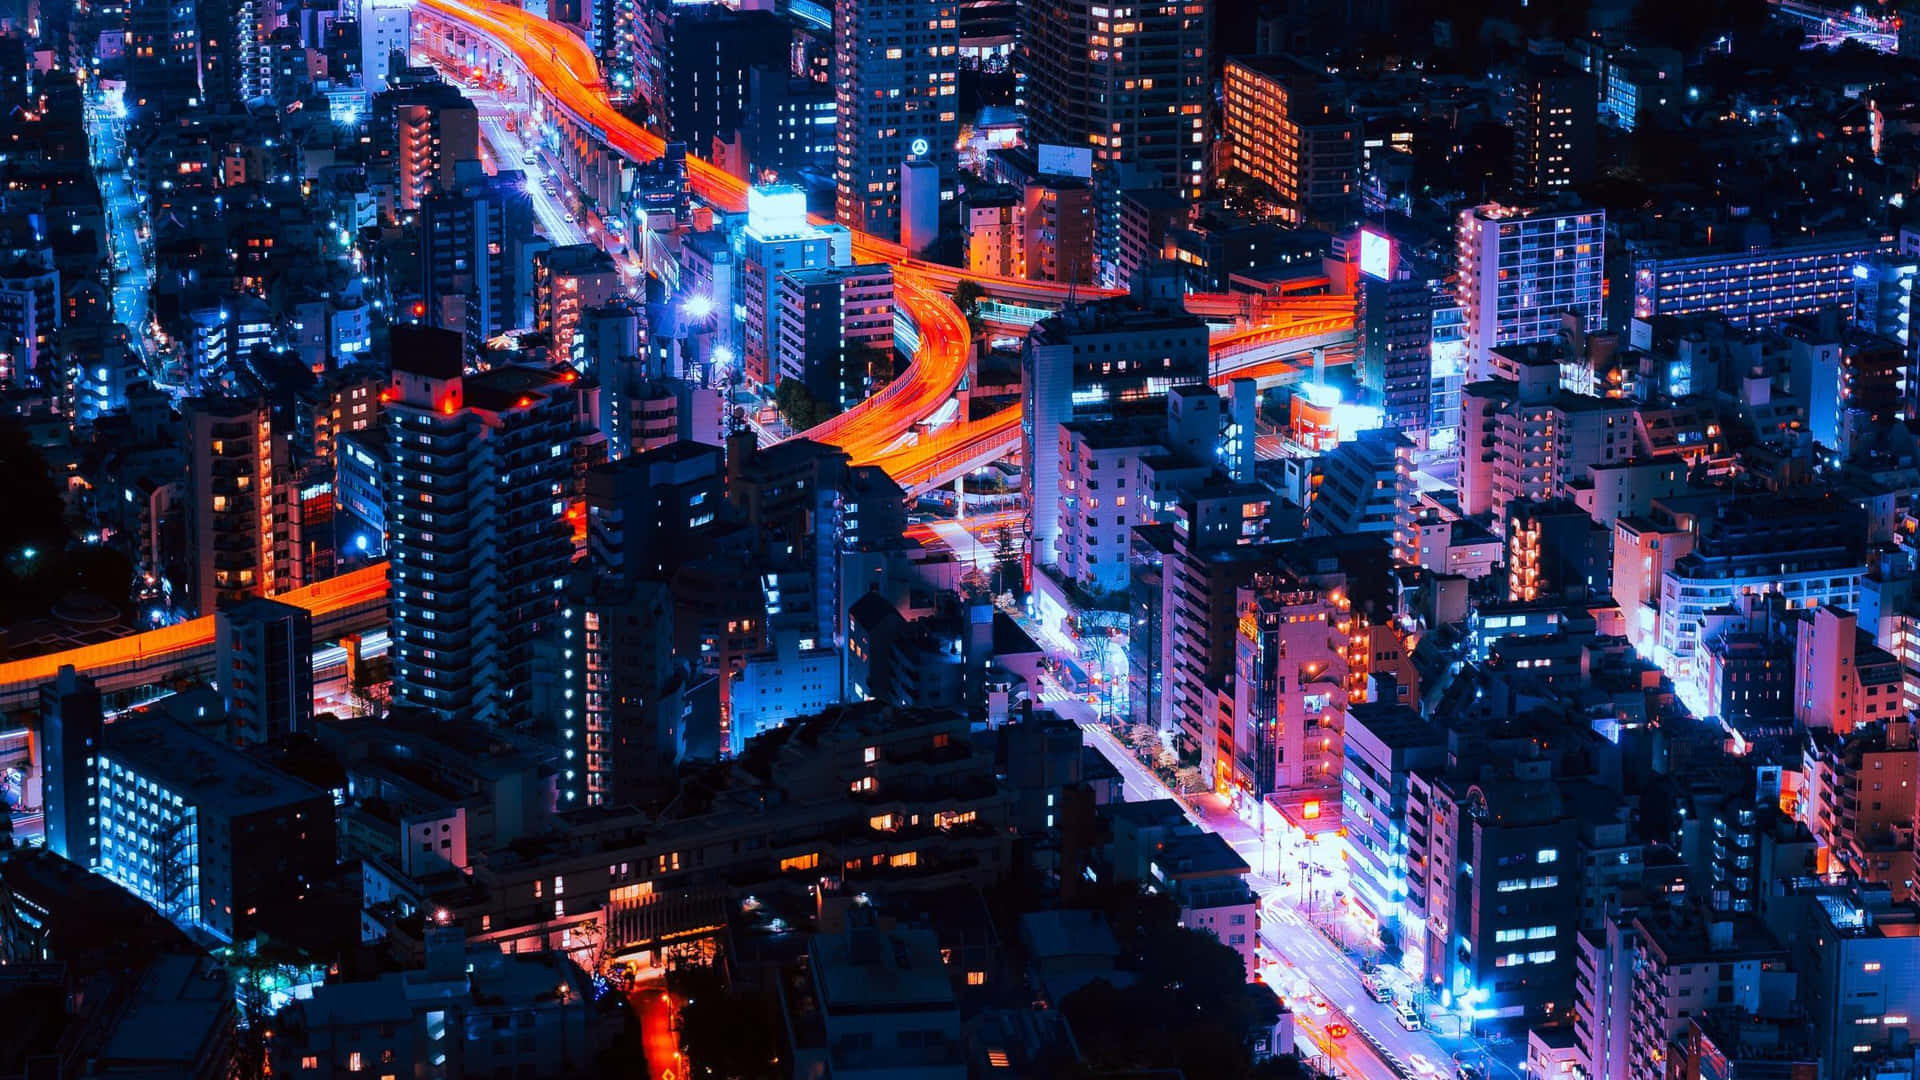 A vibrant and energetic neon cityscape.